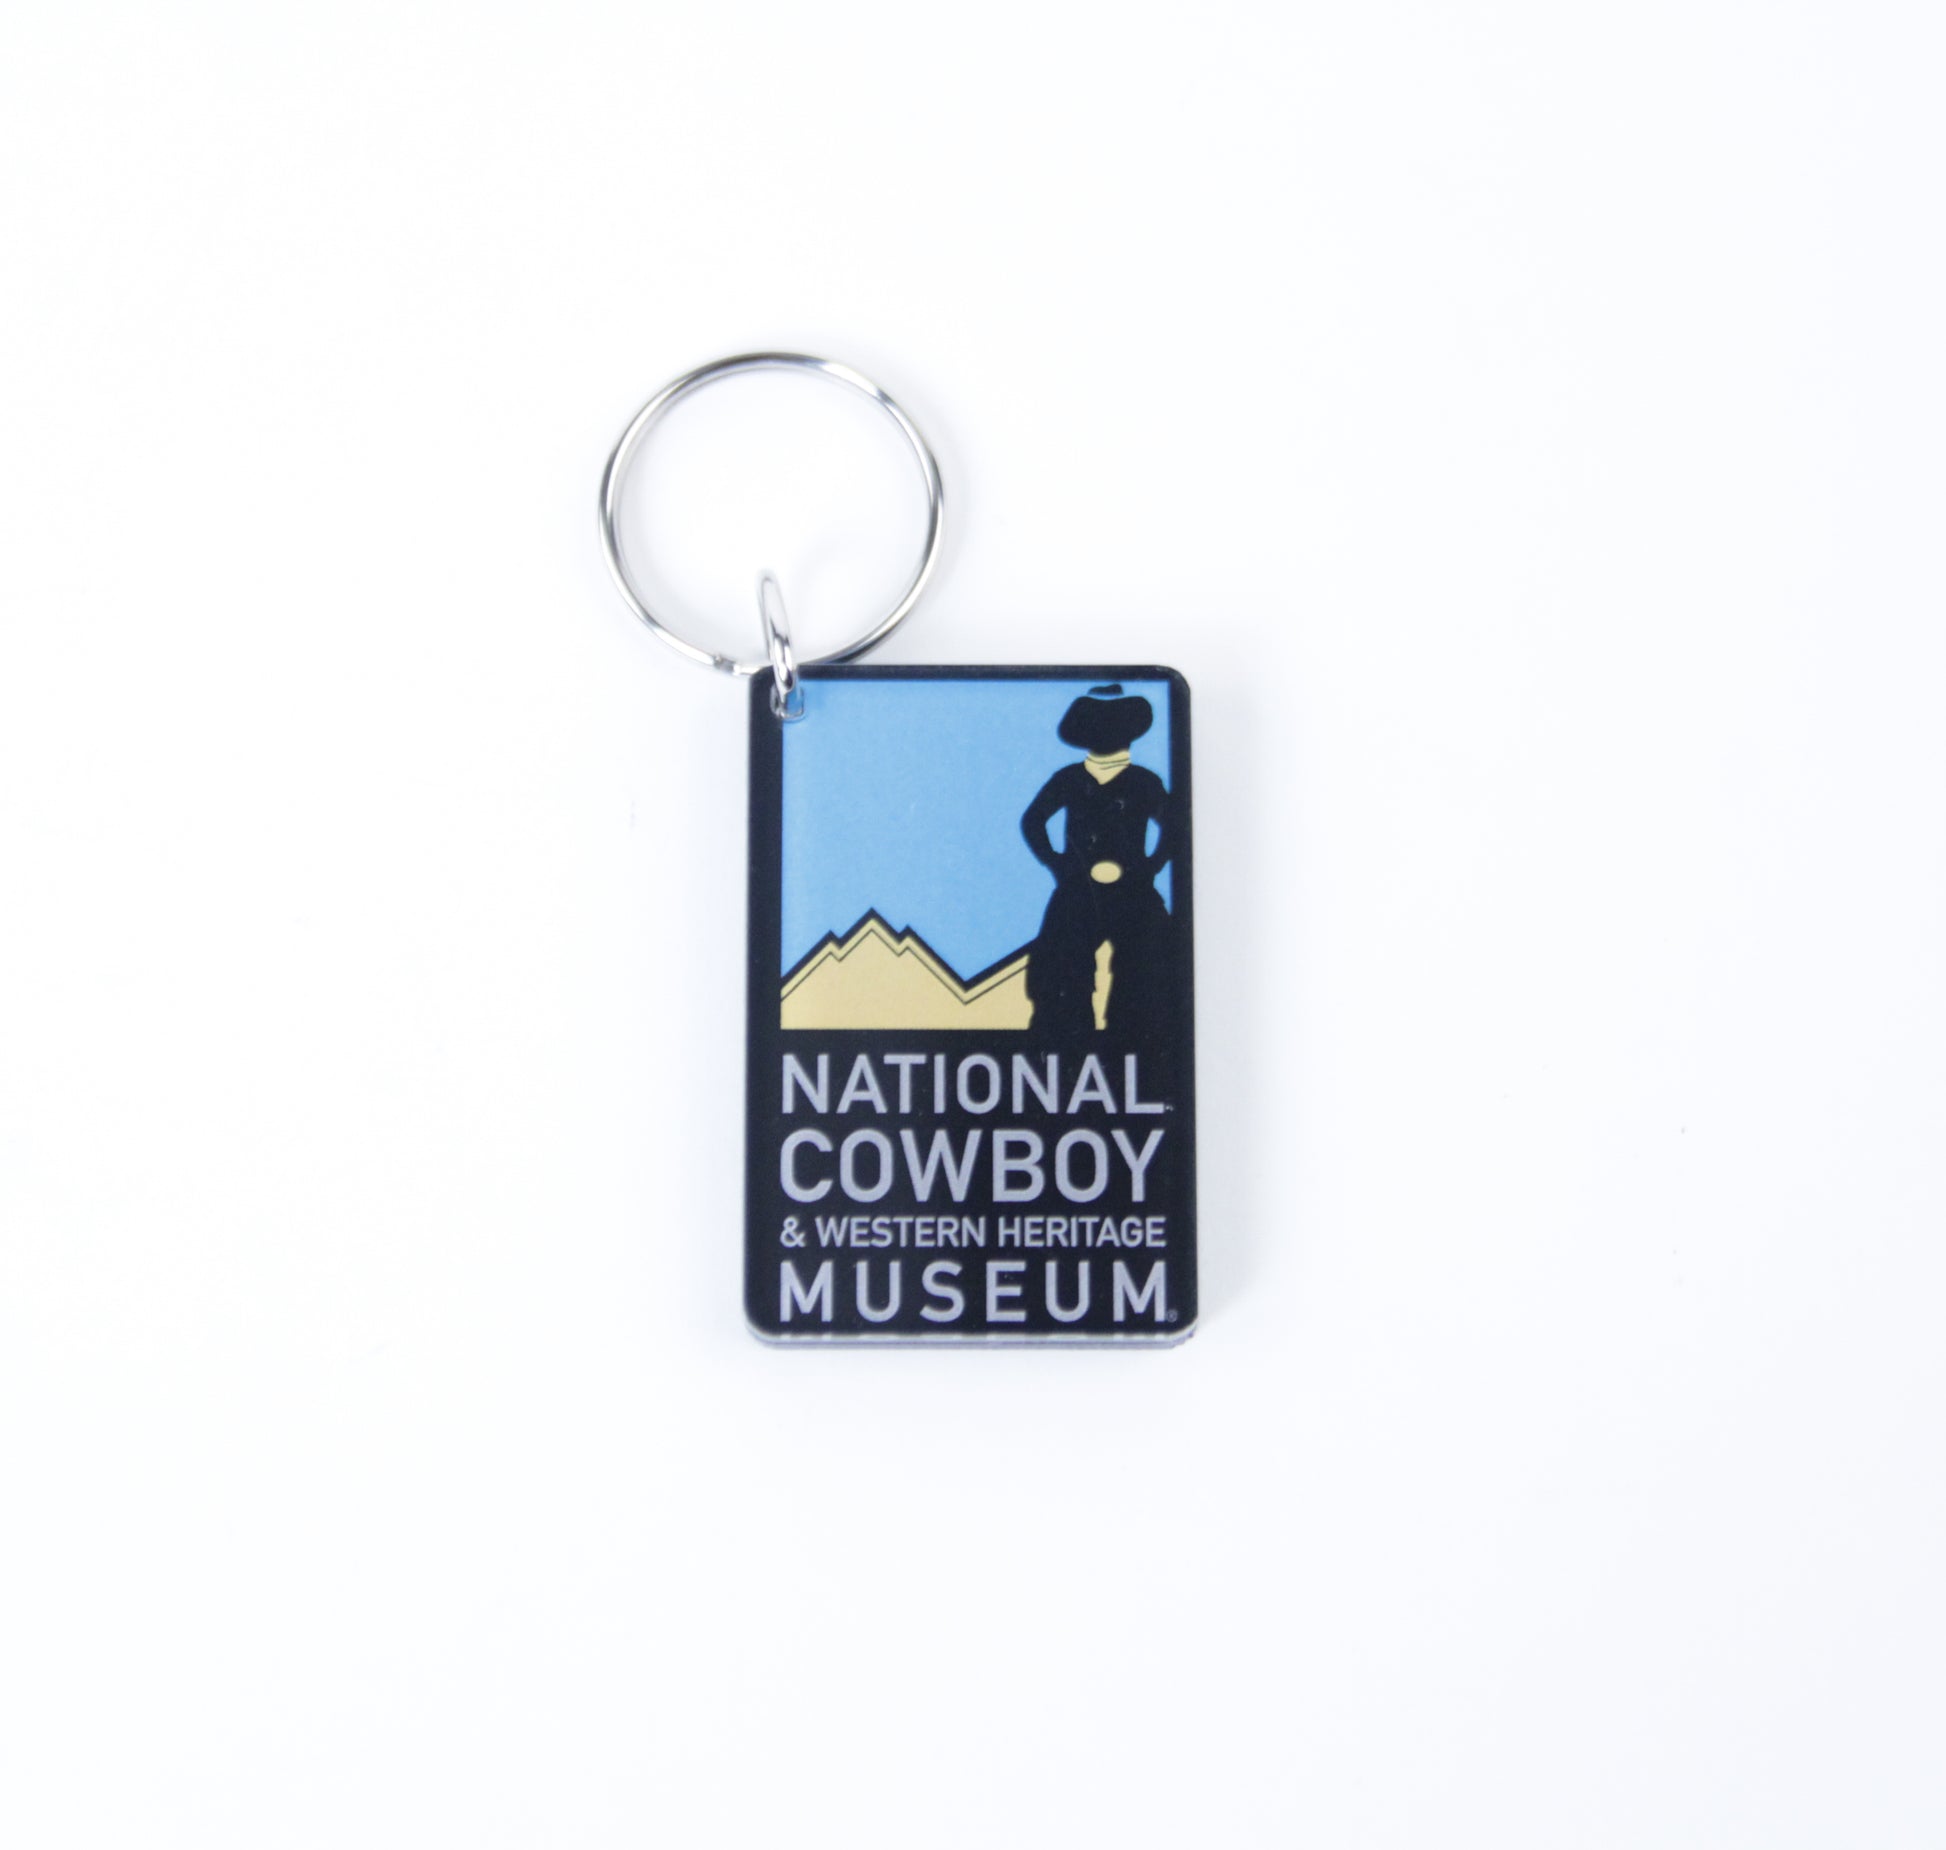 national cowboy and western heritage museum keychain keep your keys